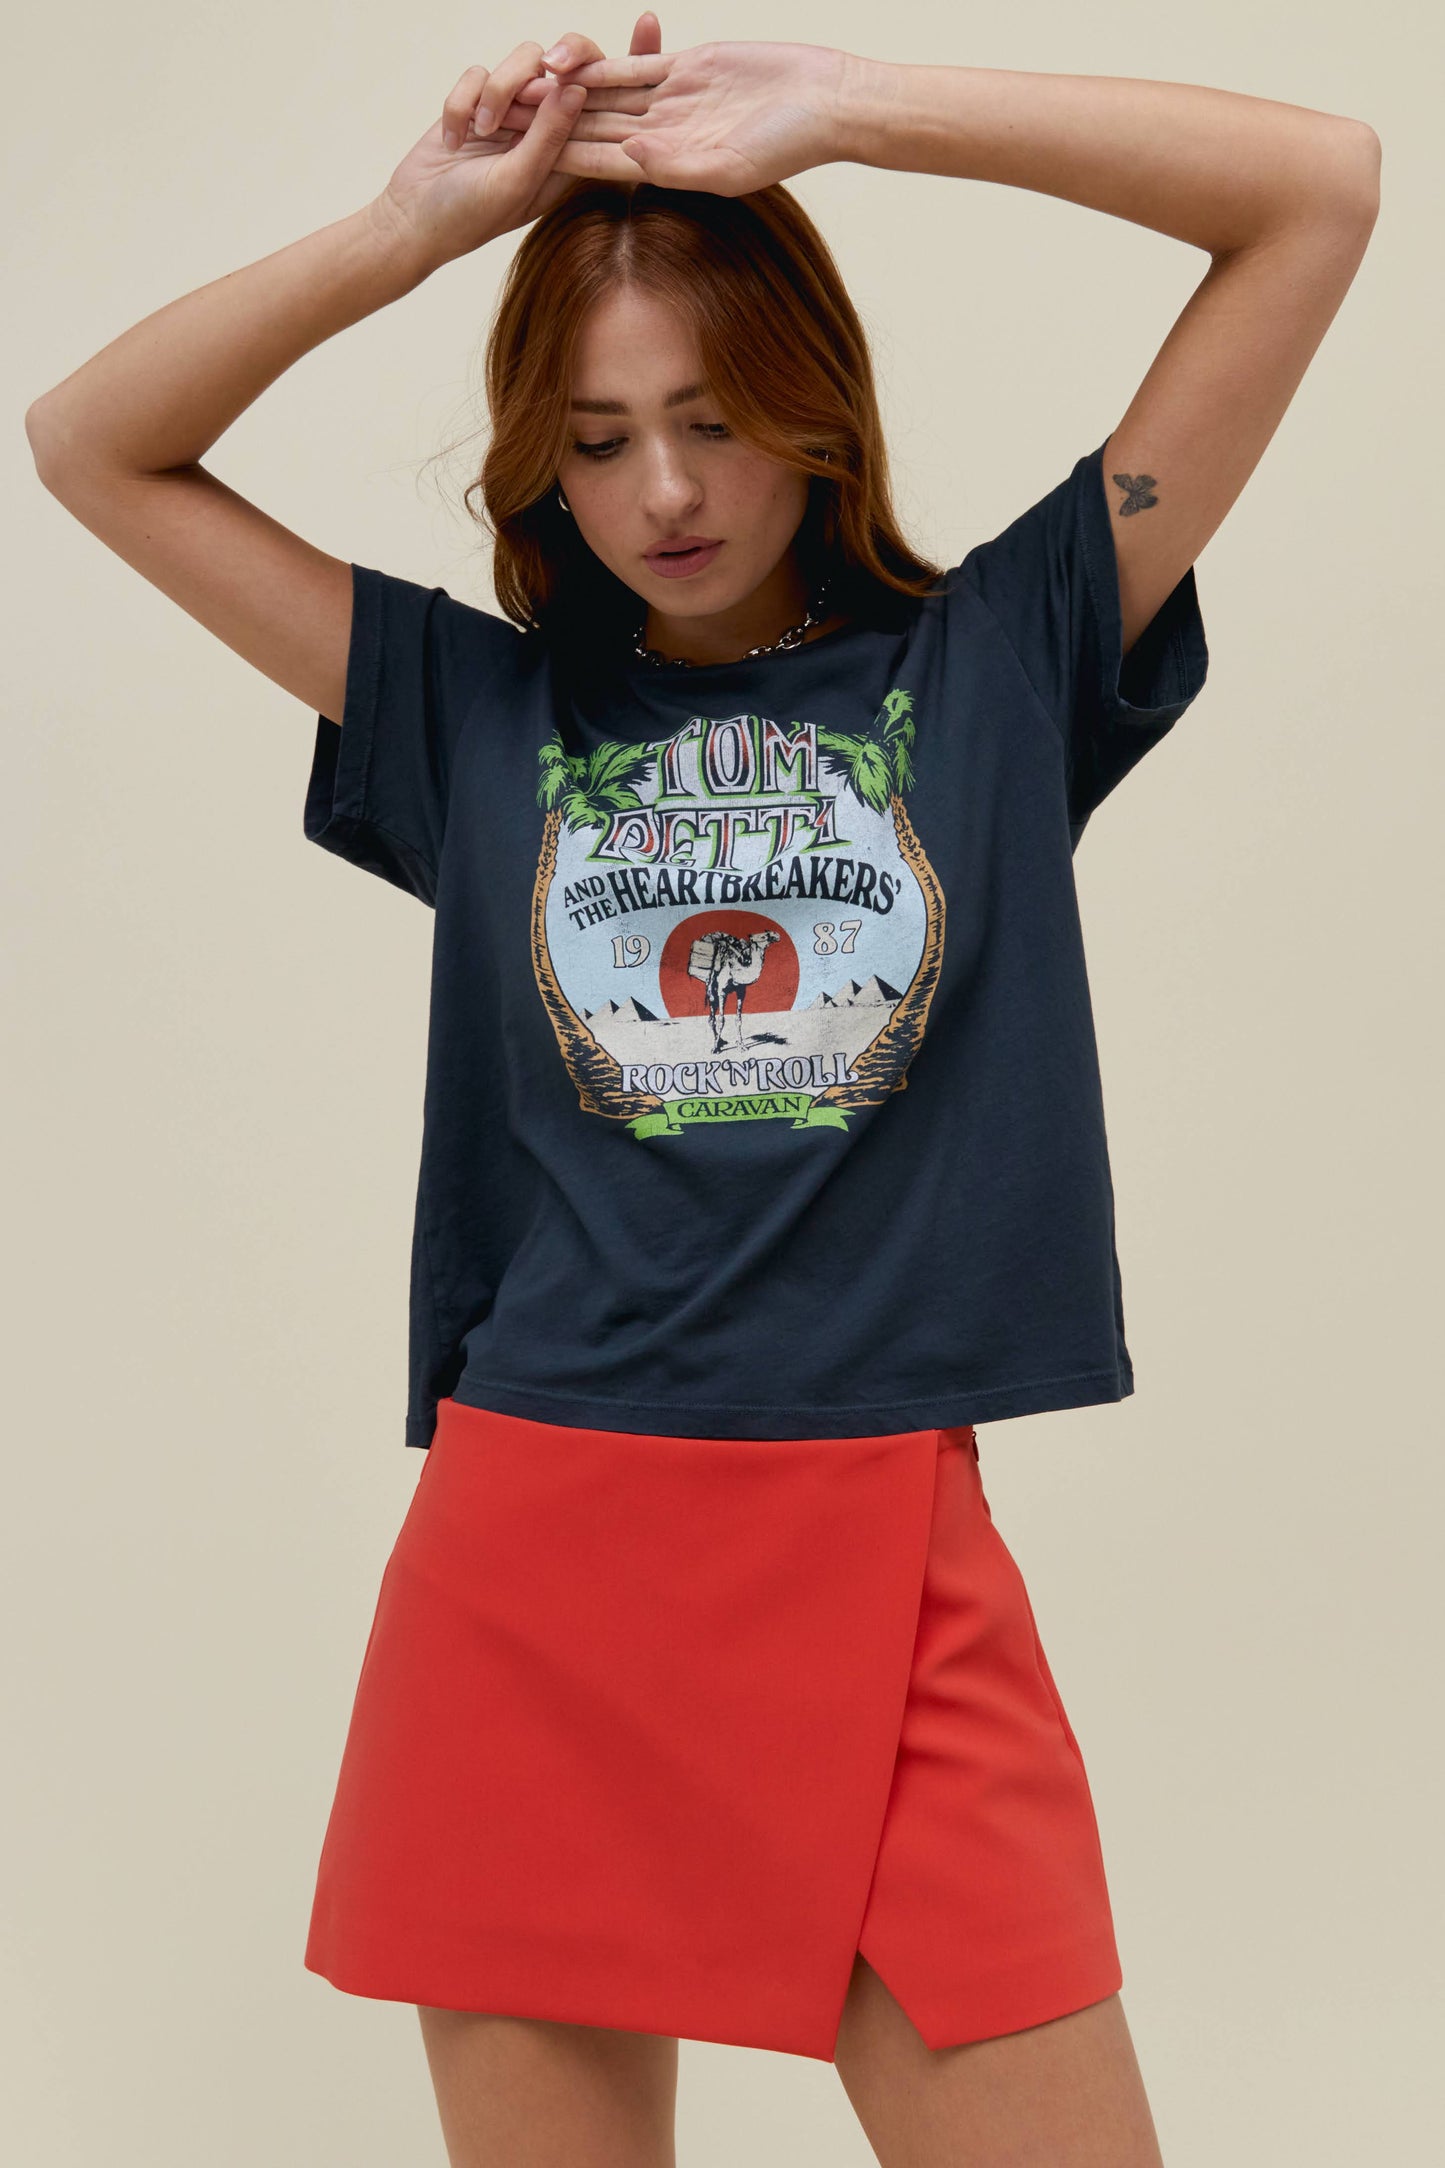 A model featuring a vintage black solo tee  stamped with 'Tom Petty' and designed with pine trees on each side